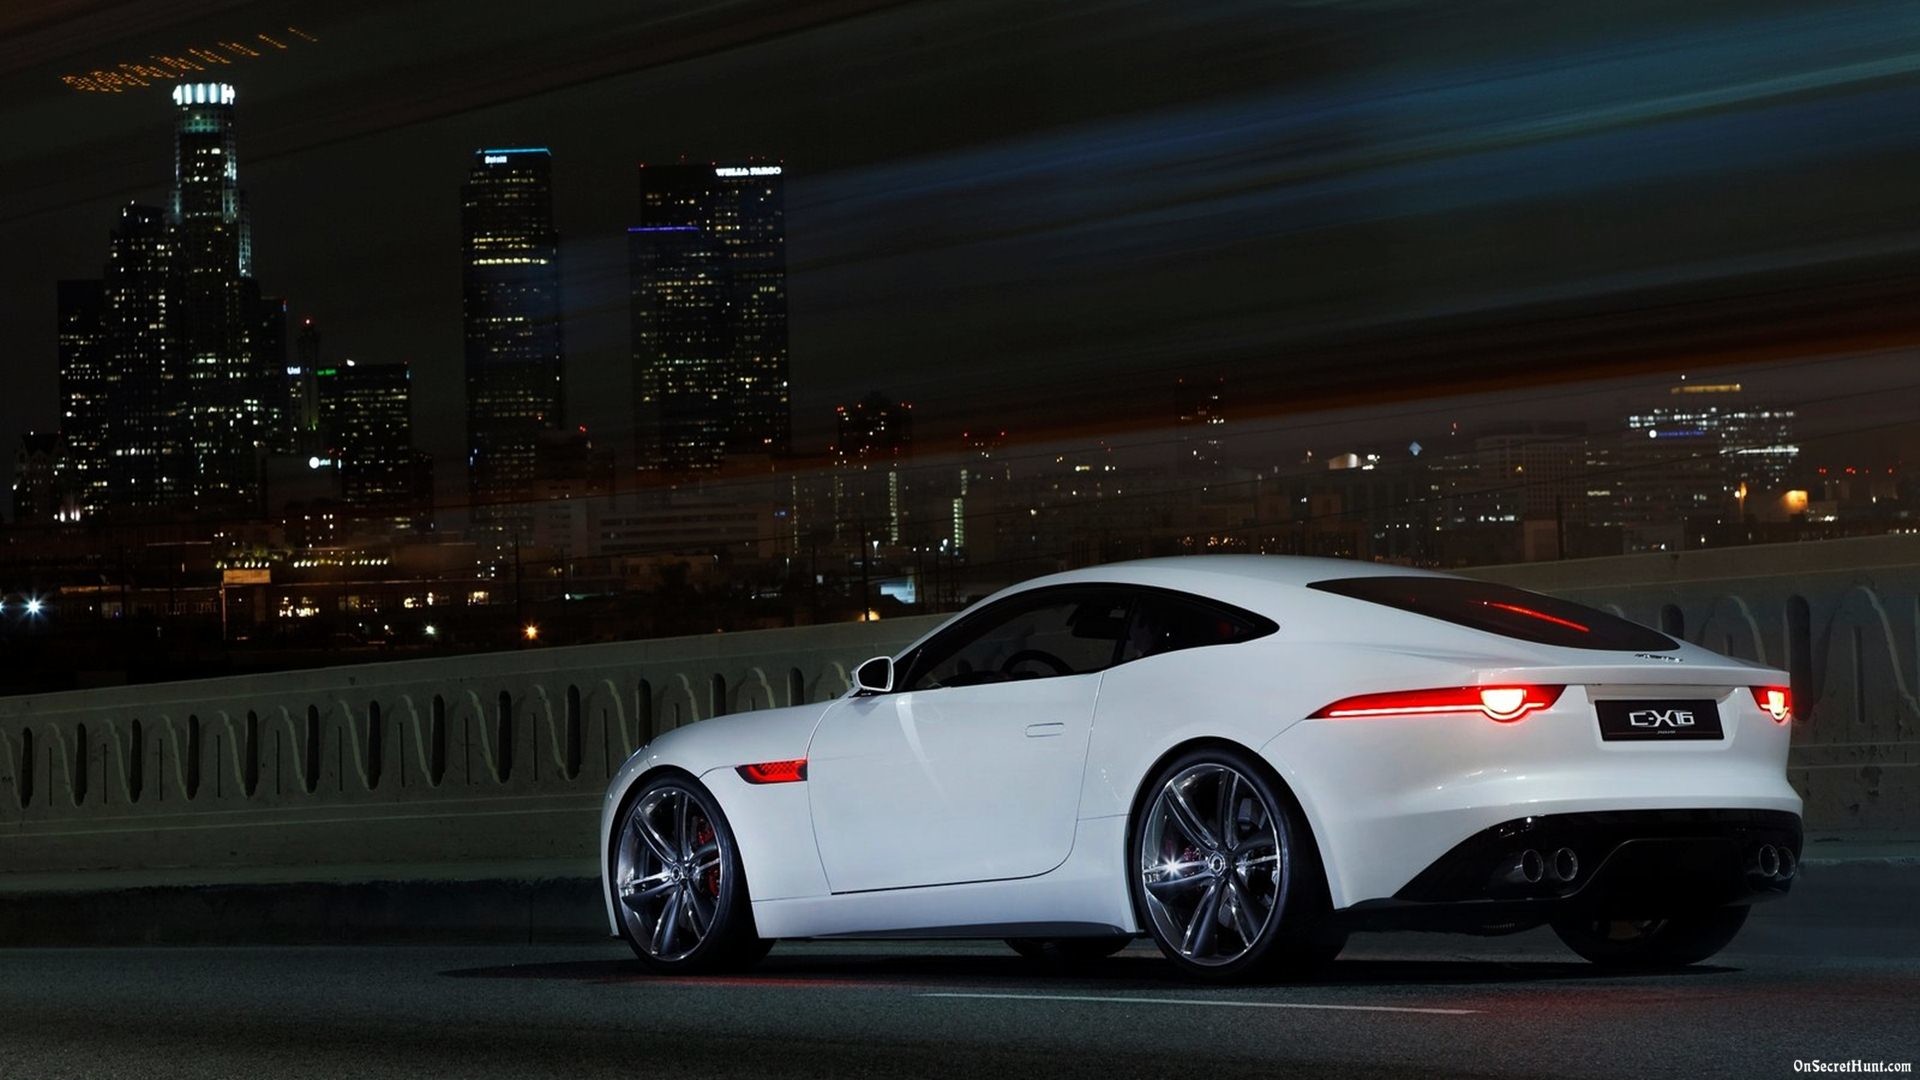 Jaguar F-Type Coupe Wallpapers